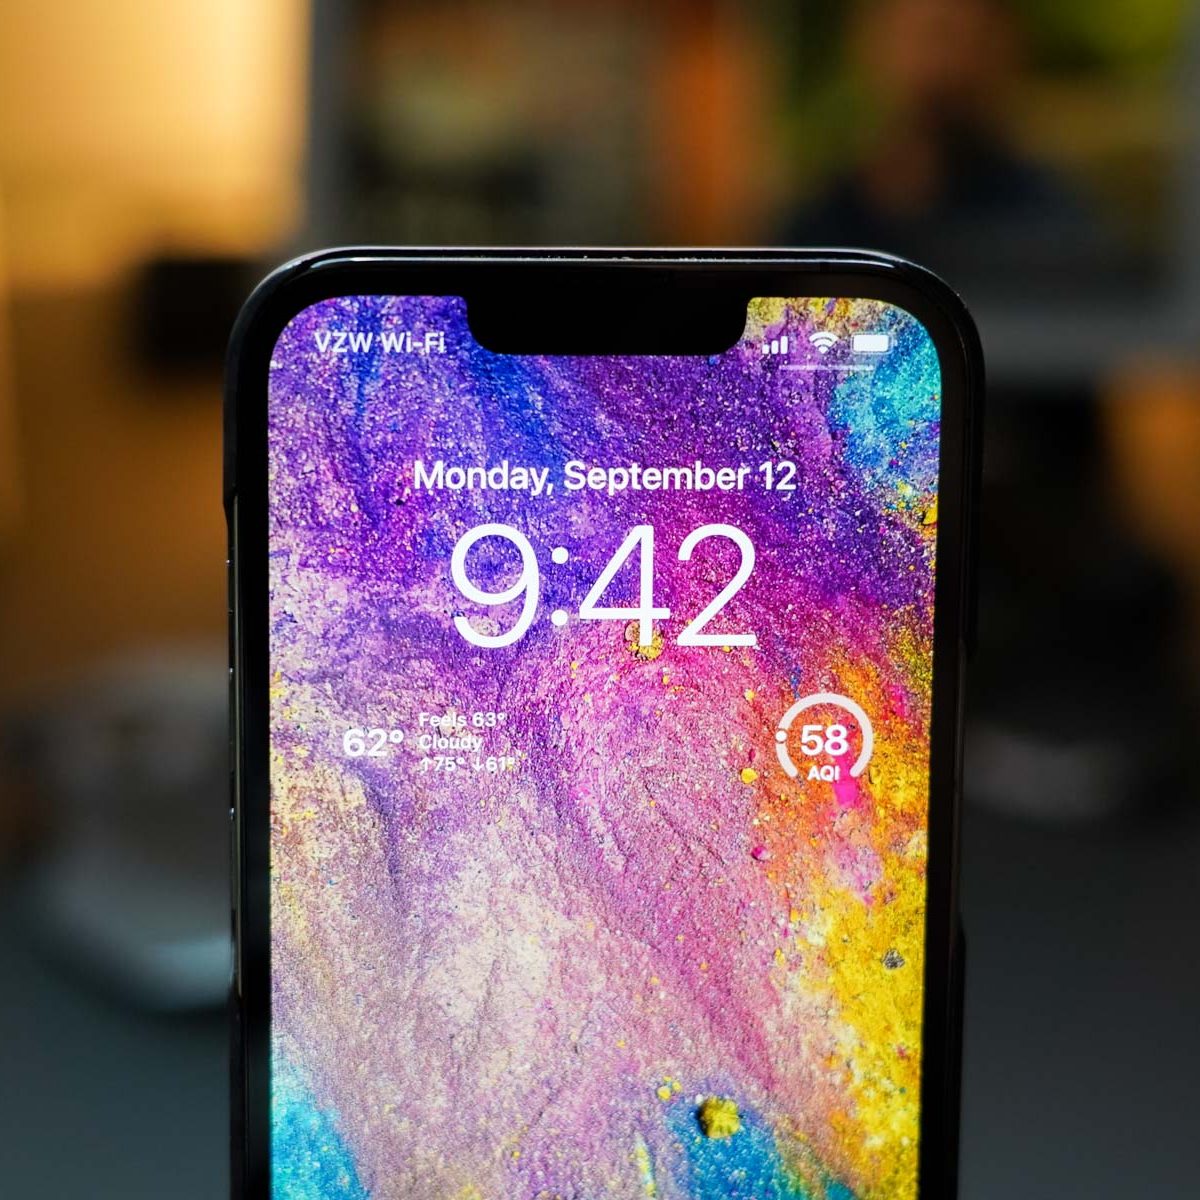 Google now offers a suite of widgets for the iPhone's lock screen with iOS 16